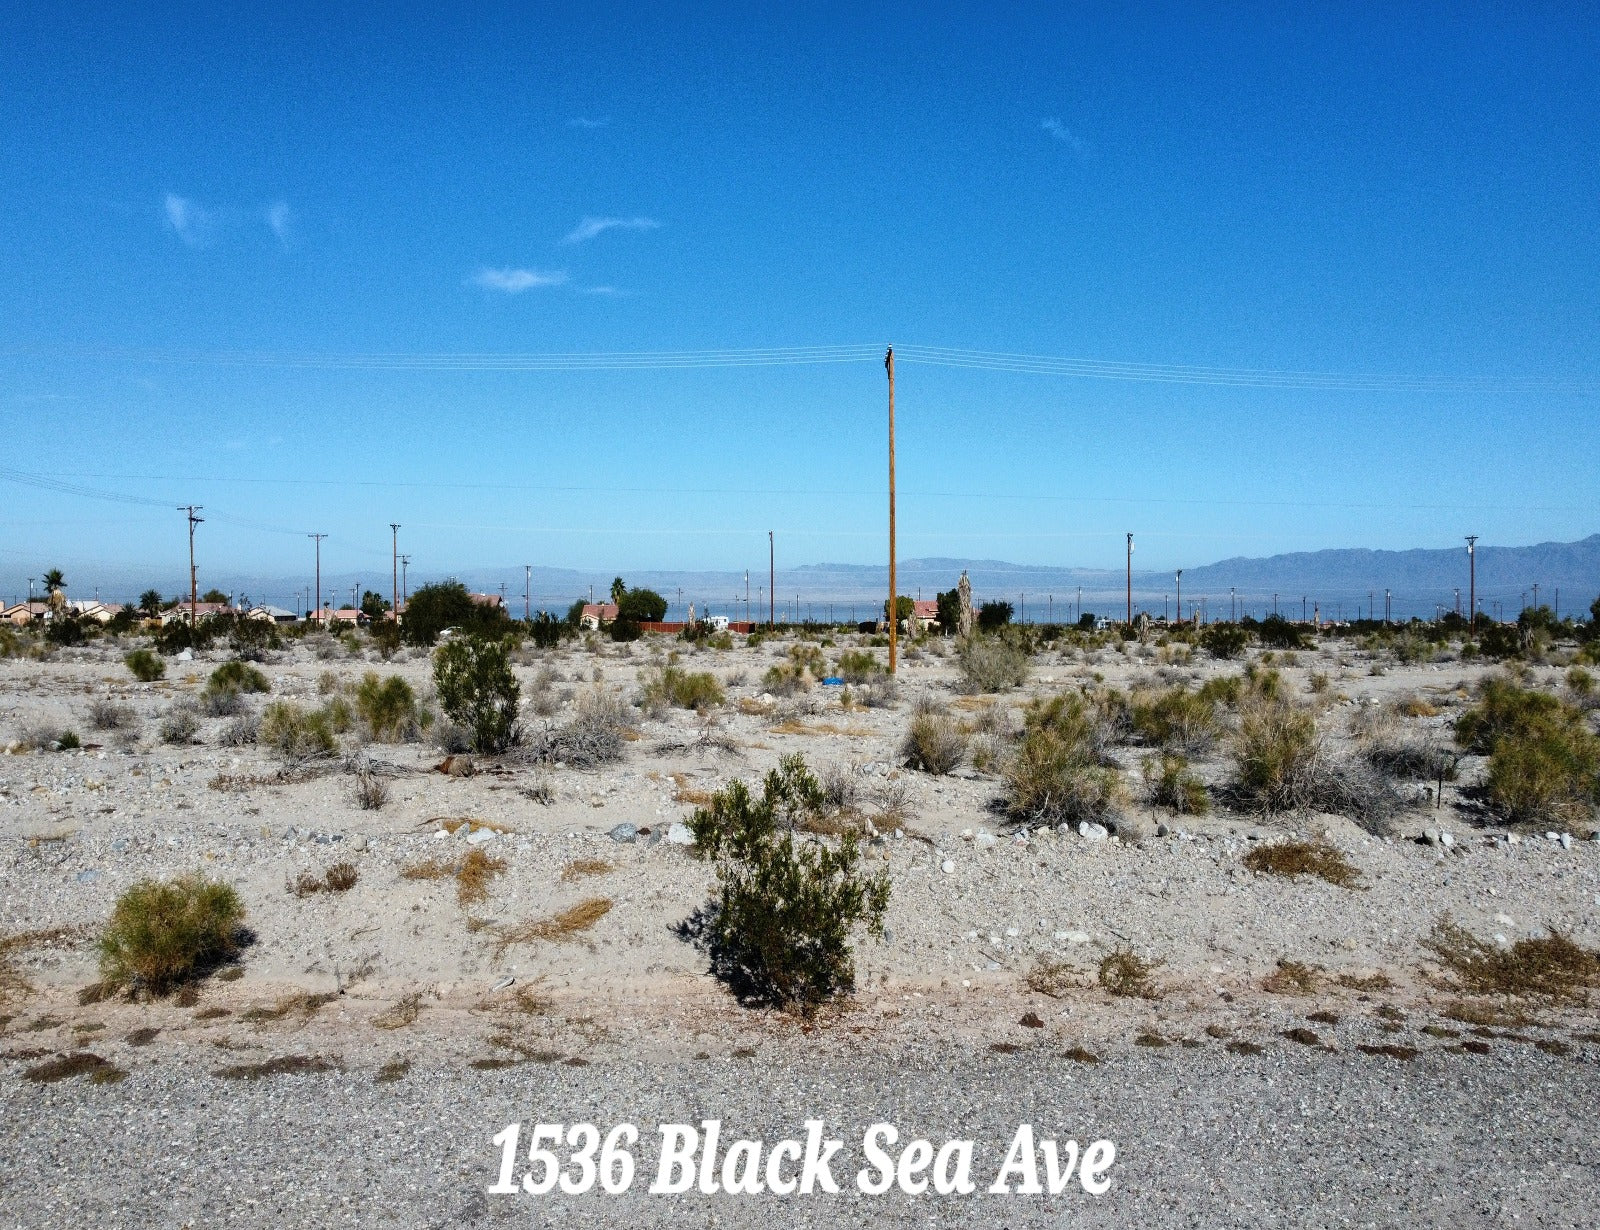 GREAT RESIDENTIAL LOT IN VISTA DEL MAR WITH BEAUTIFUL SCENERY!! LOW MONTHLY PAYMENTS OF $225.00  1536 Black Sea Ave., Salton City, CA 92275 APN: 007-522-025-000 - Get Land Today